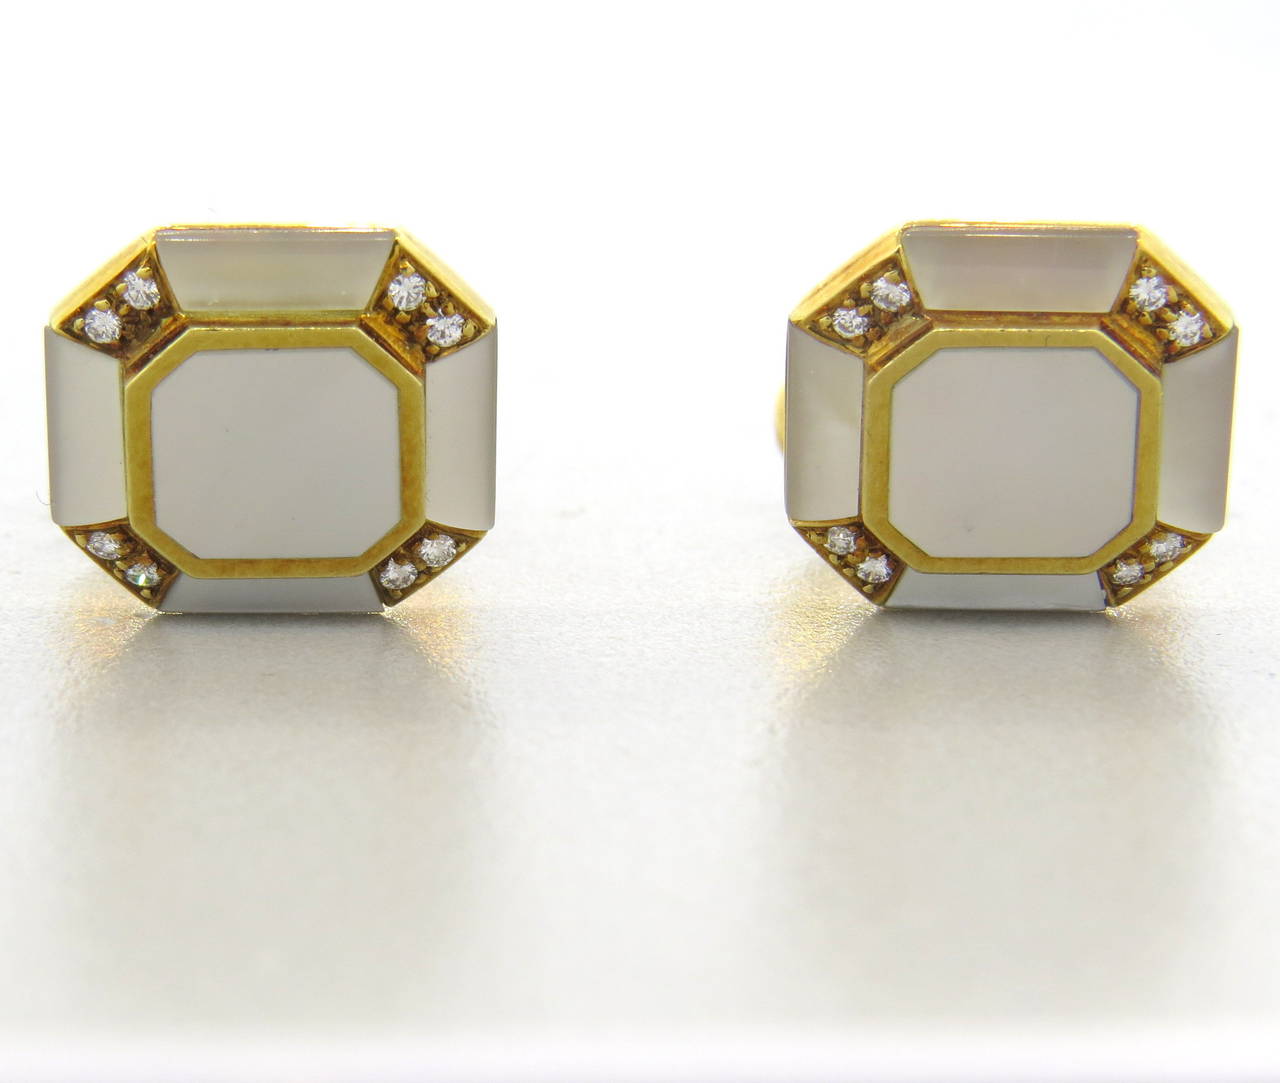 18k gold classic cufflinks, set with diamonds and mother of pearl top. Measuring 15mm x 15mm. Weight - 16.3 grams